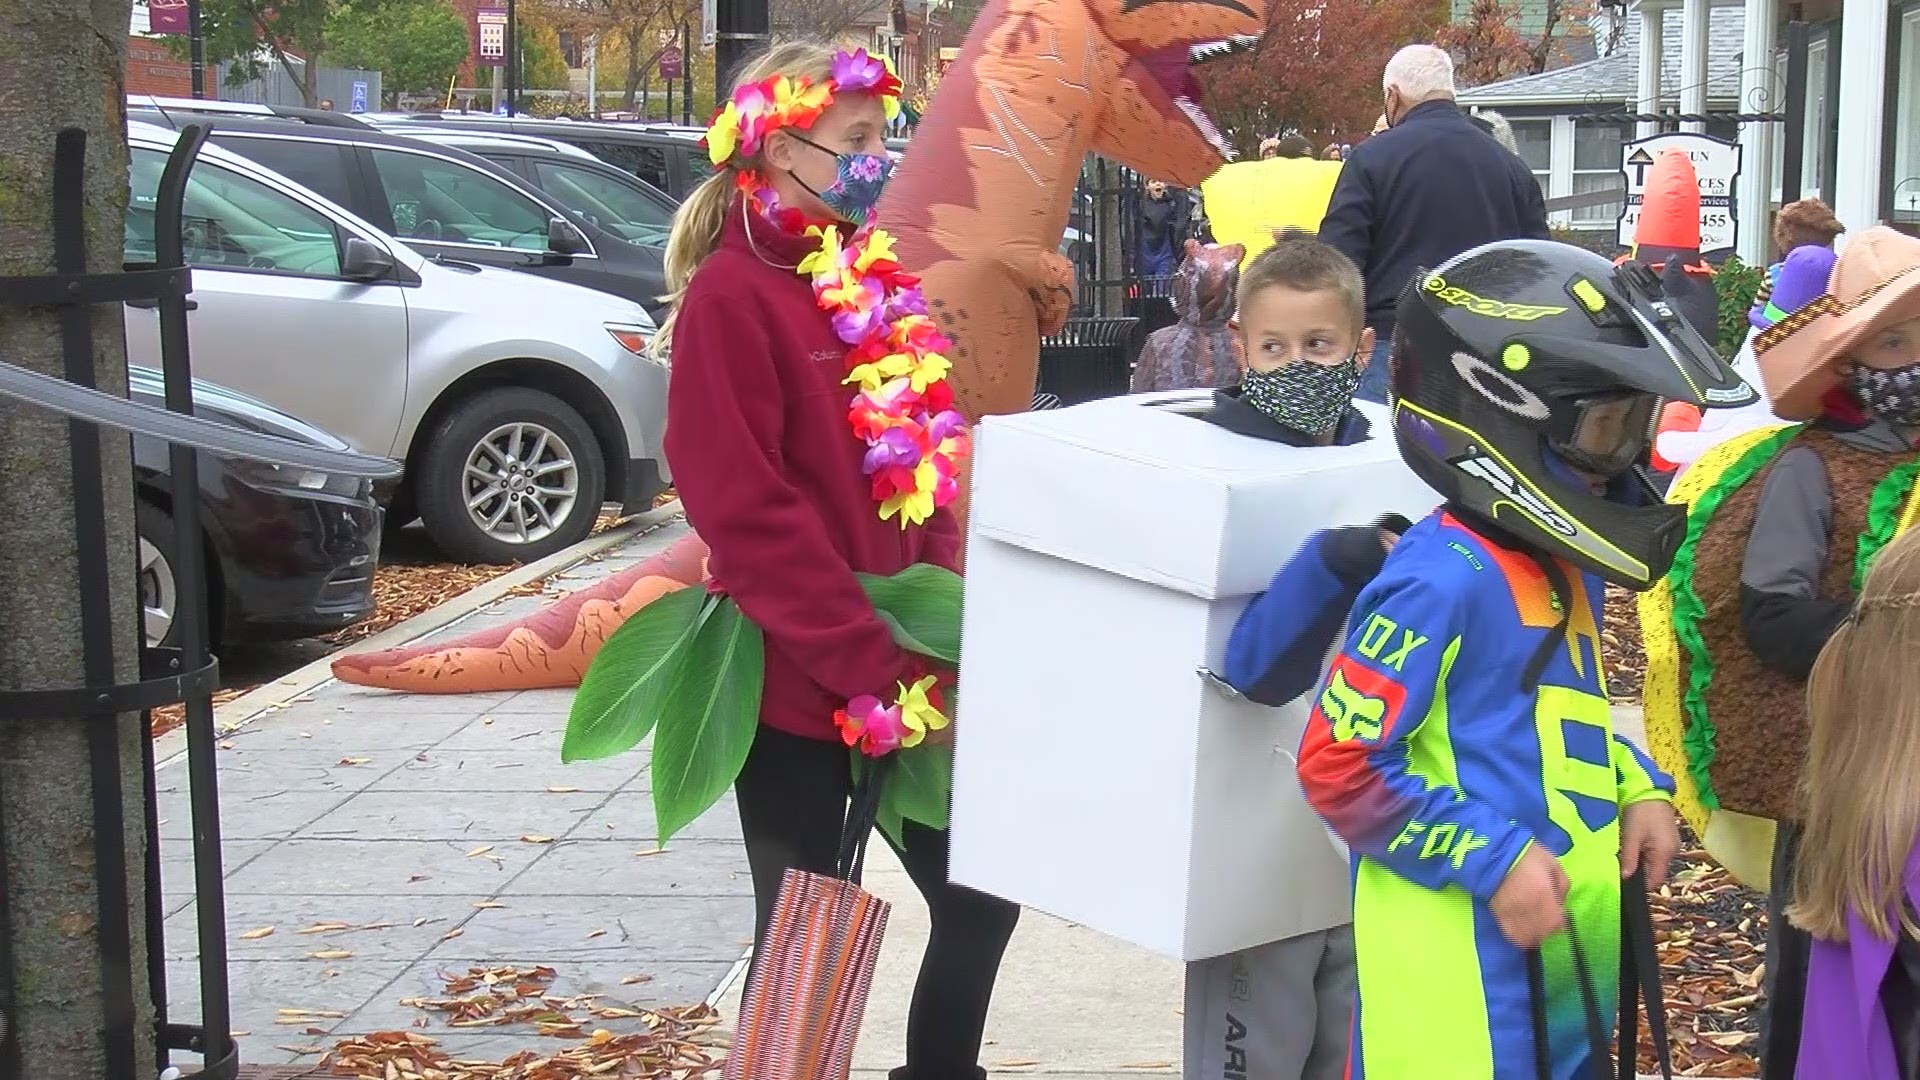 More than 25 local businesses passing out candy this year